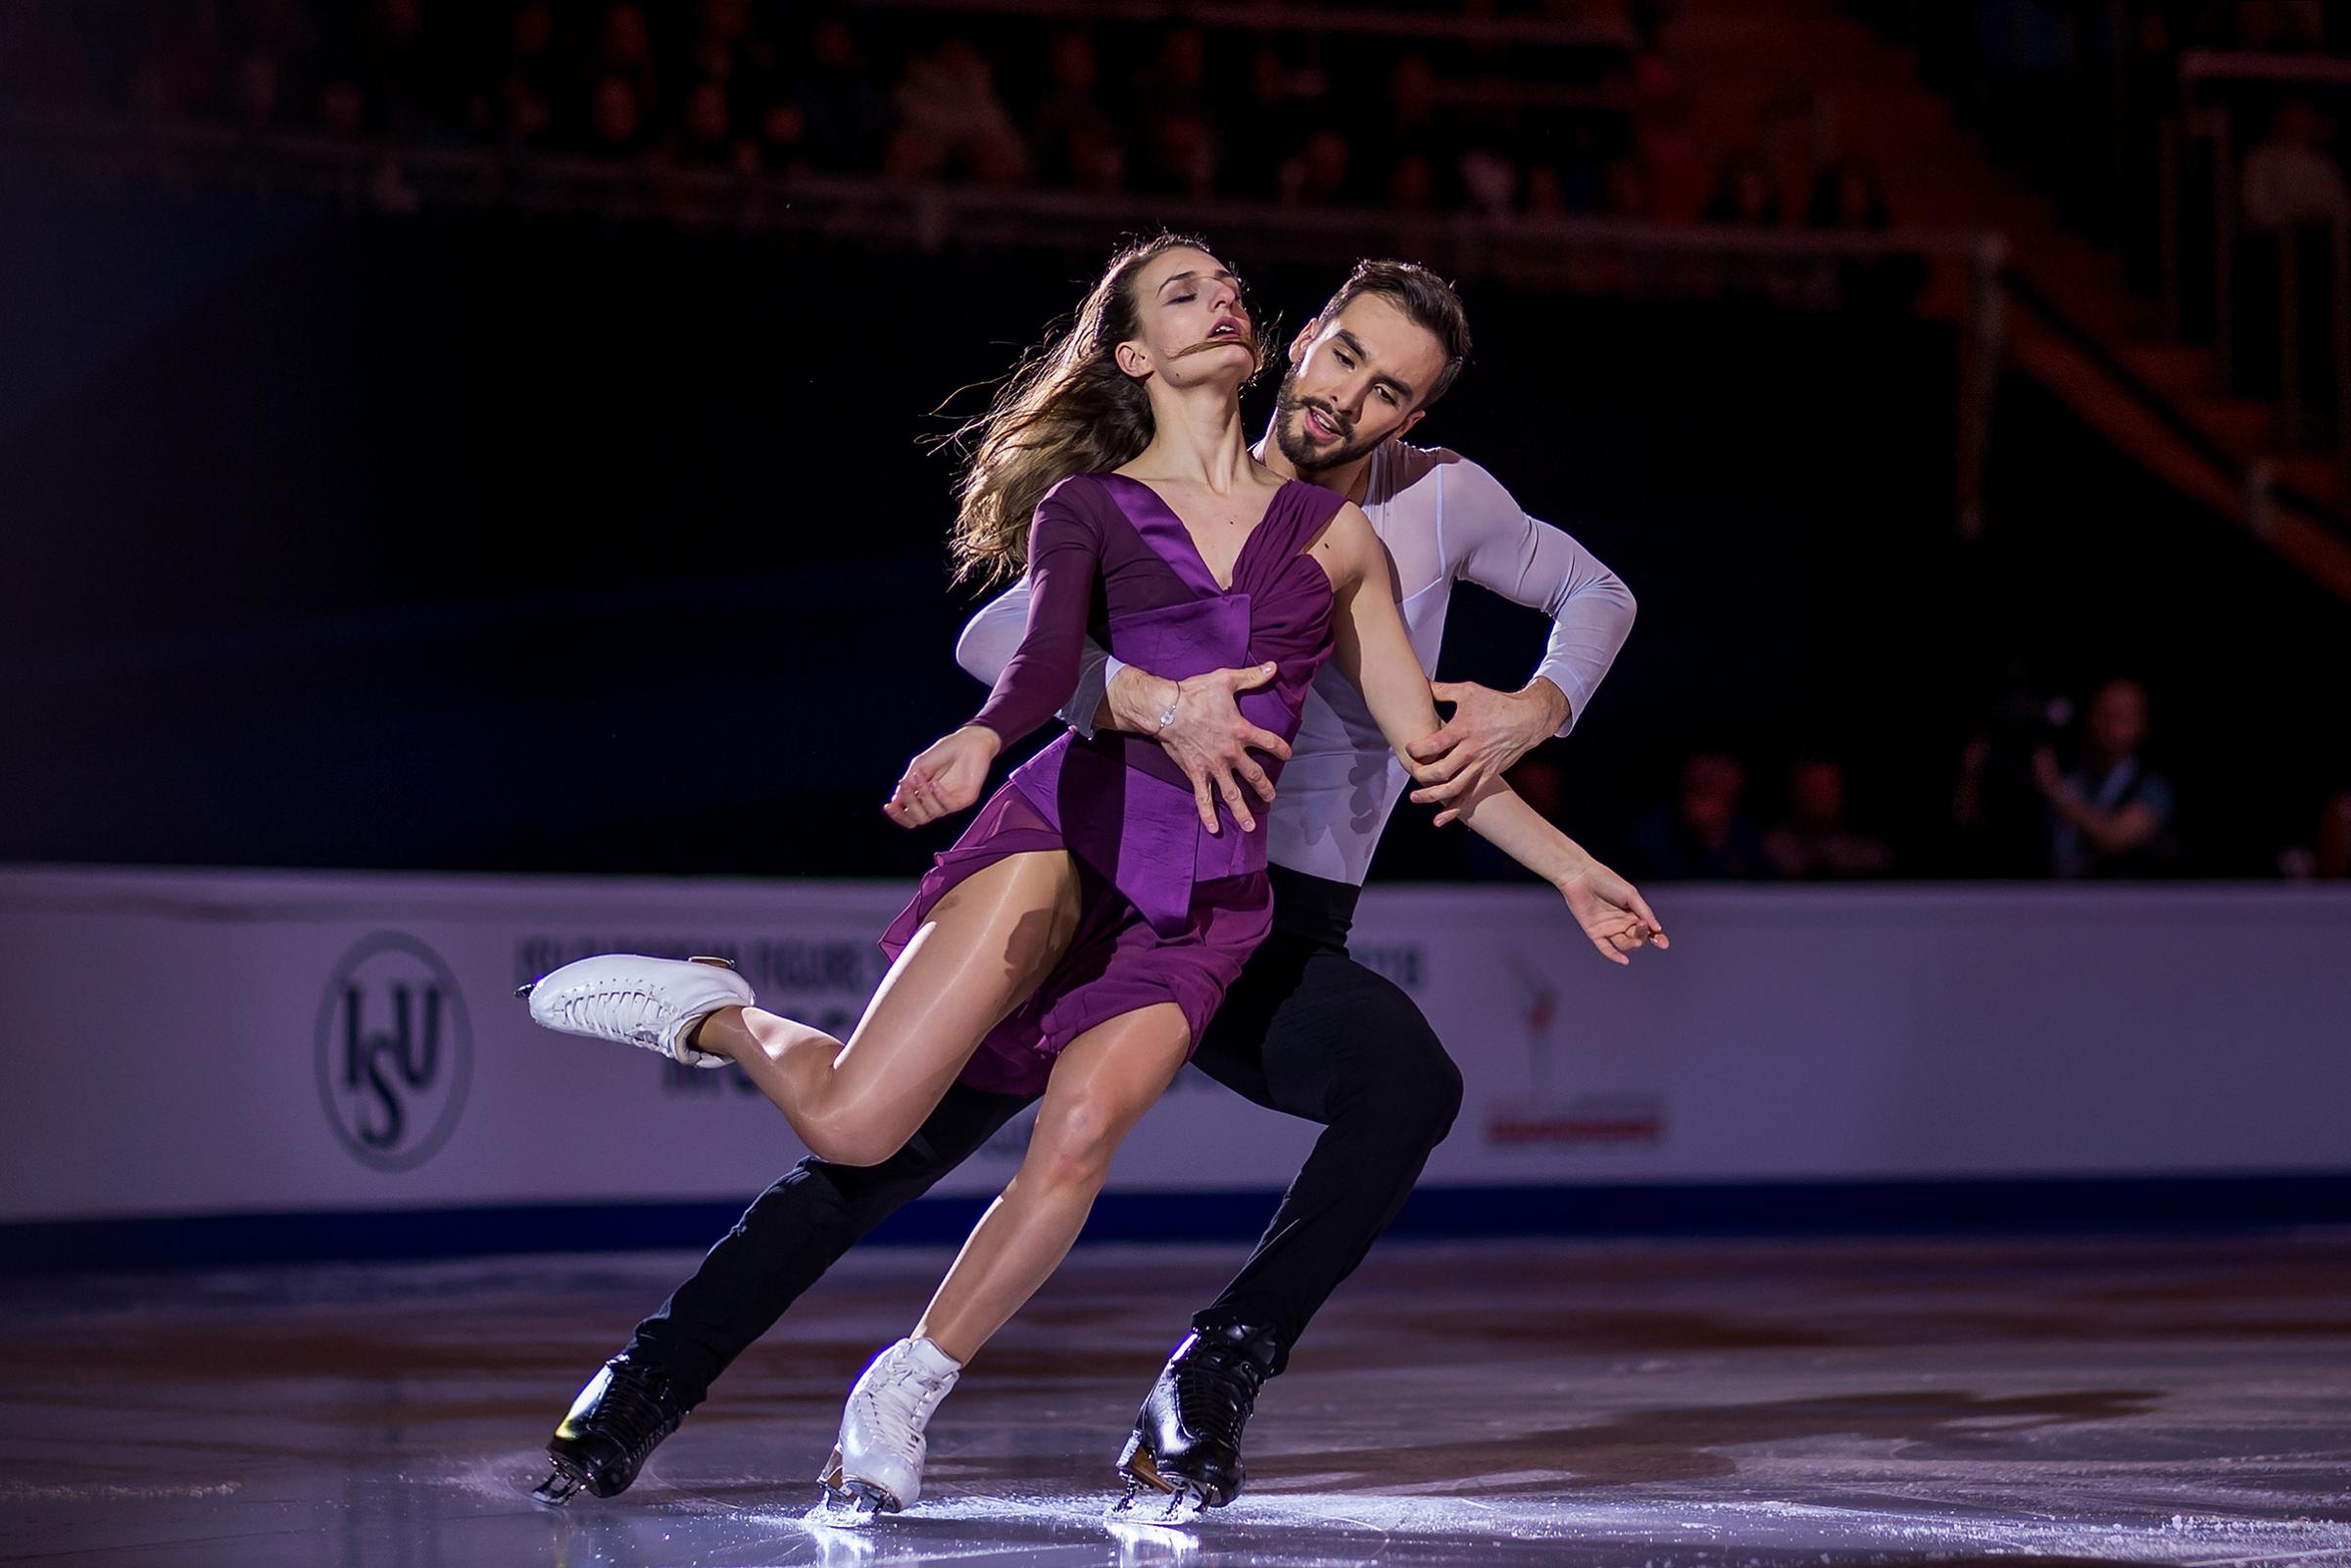 Gabriella Papadakis and Guillaume Cizeron of France perform in the Gala Exhibition during day five og the European Figure Skating Championships at Megasport Arena, in Moscow, Russia, on Jan. 21, 2018.